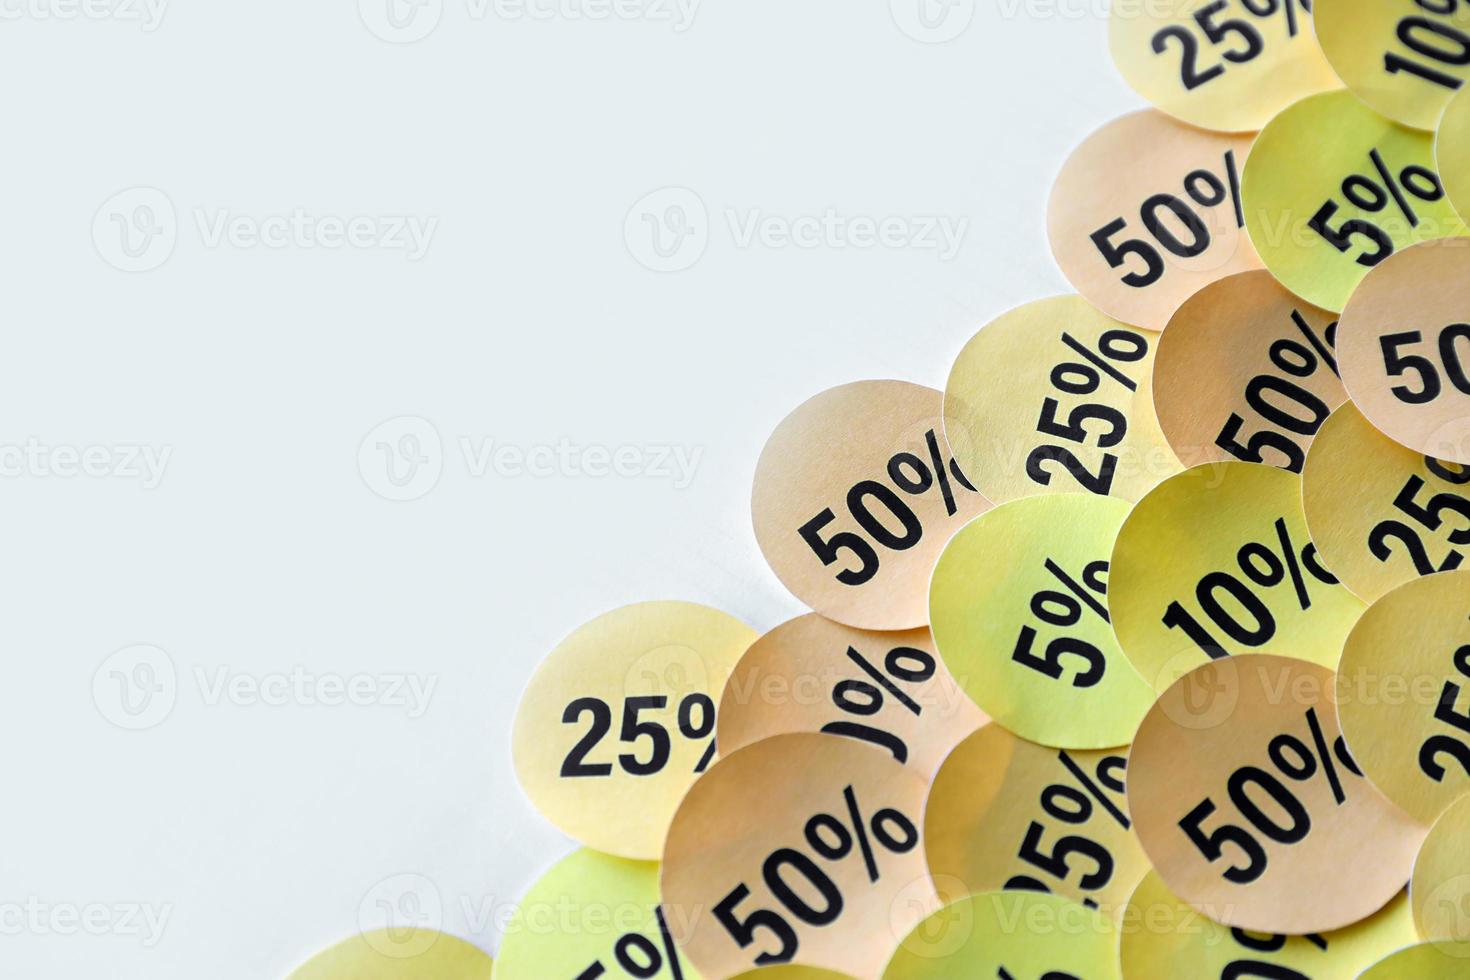 Large amount of stickers with yellow percentage values for black friday or cyber monday sale. Abstract image of discount prices photo